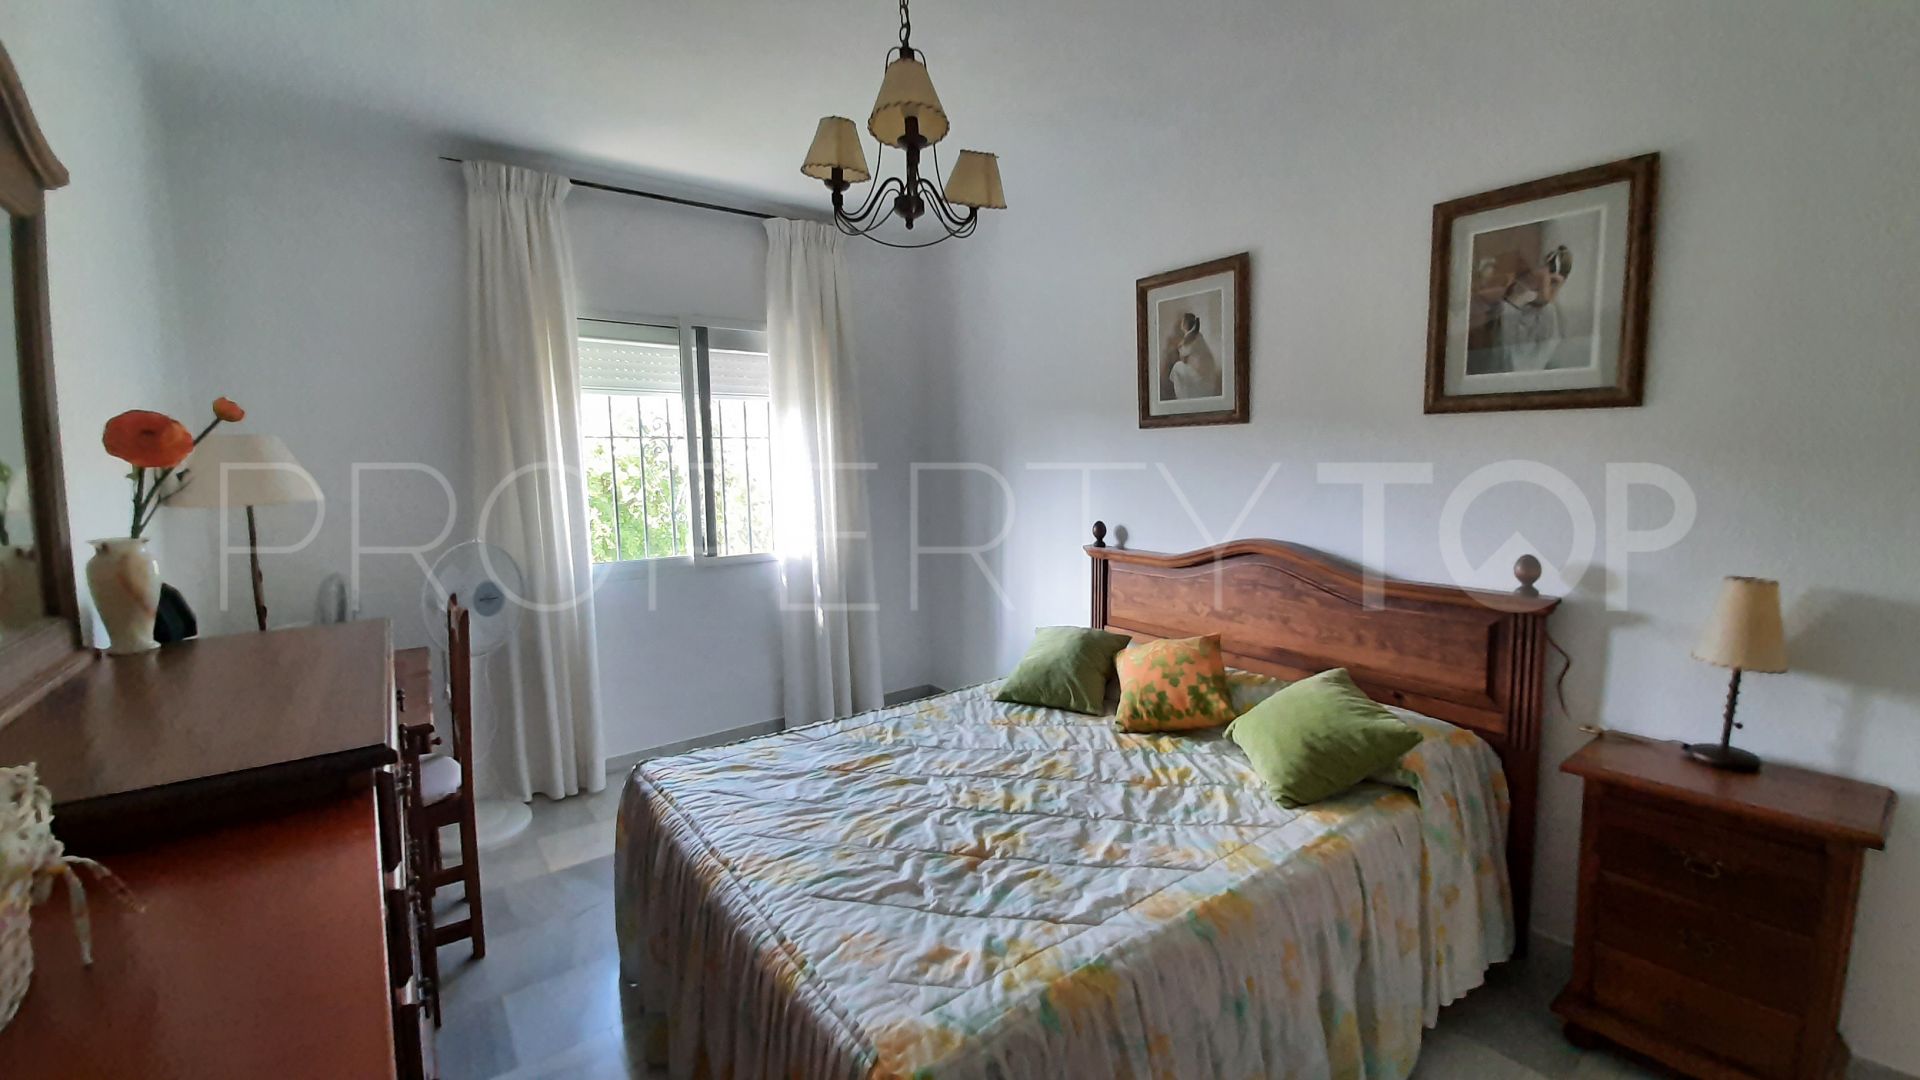 For sale finca with 3 bedrooms in La Cala